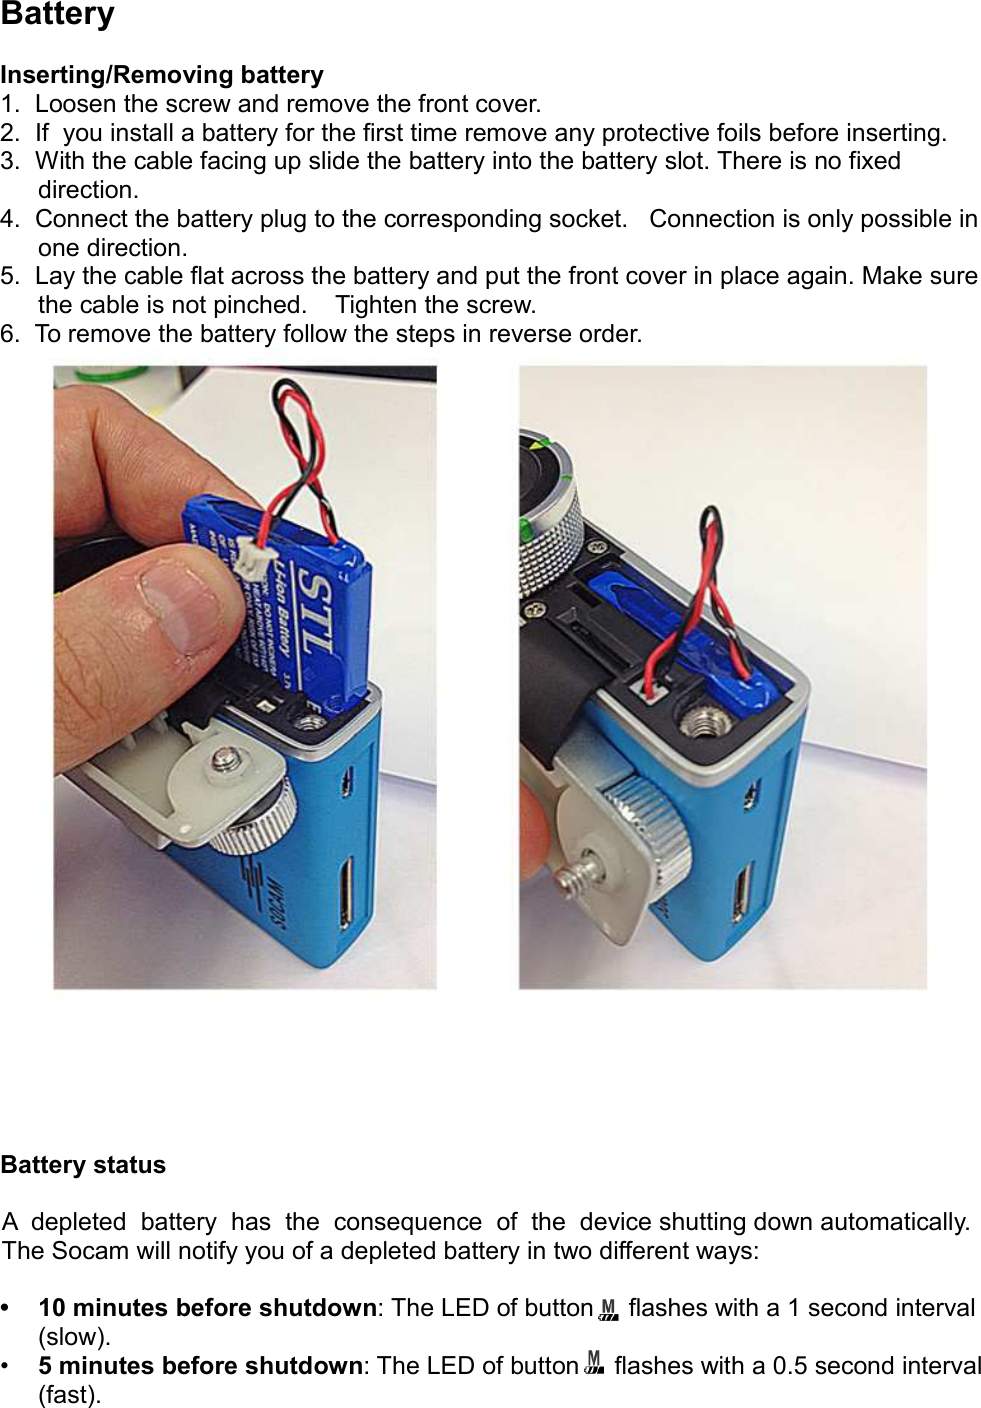 BatteryInserting/Removing battery1.  Loosen the screw and remove the front cover.2.  If  you install a battery for the first time remove any protective foils before inserting.3.  With the cable facing up slide the battery into the battery slot. There is no fixed direction.4.  Connect the battery plug to the corresponding socket.   Connection is only possible in one direction.5.  Lay the cable flat across the battery and put the front cover in place again. Make sure the cable is not pinched.    Tighten the screw.6.  To remove the battery follow the steps in reverse order.Battery statusA  depleted  battery  has  the  consequence  of  the  device shutting down automatically. The Socam will notify you of a depleted battery in two different ways:• 10 minutes before shutdown: The LED of button     flashes with a 1 second interval (slow).•5 minutes before shutdown: The LED of button     flashes with a 0.5 second interval (fast). 